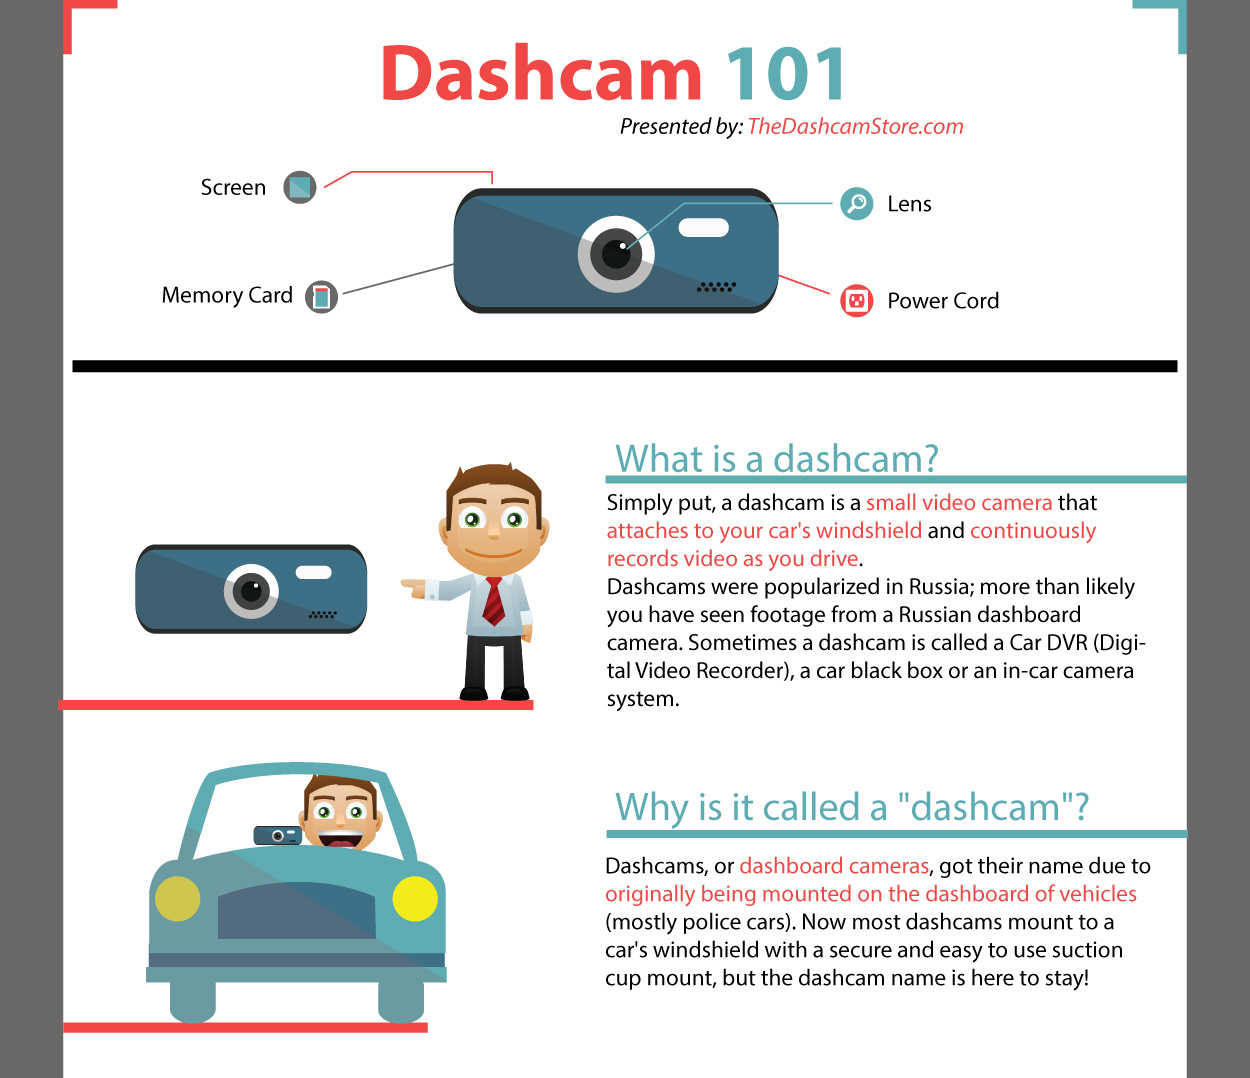 https://www.thedashcamstore.com/product_images/uploaded_images/dashcam-101-infographic.jpg